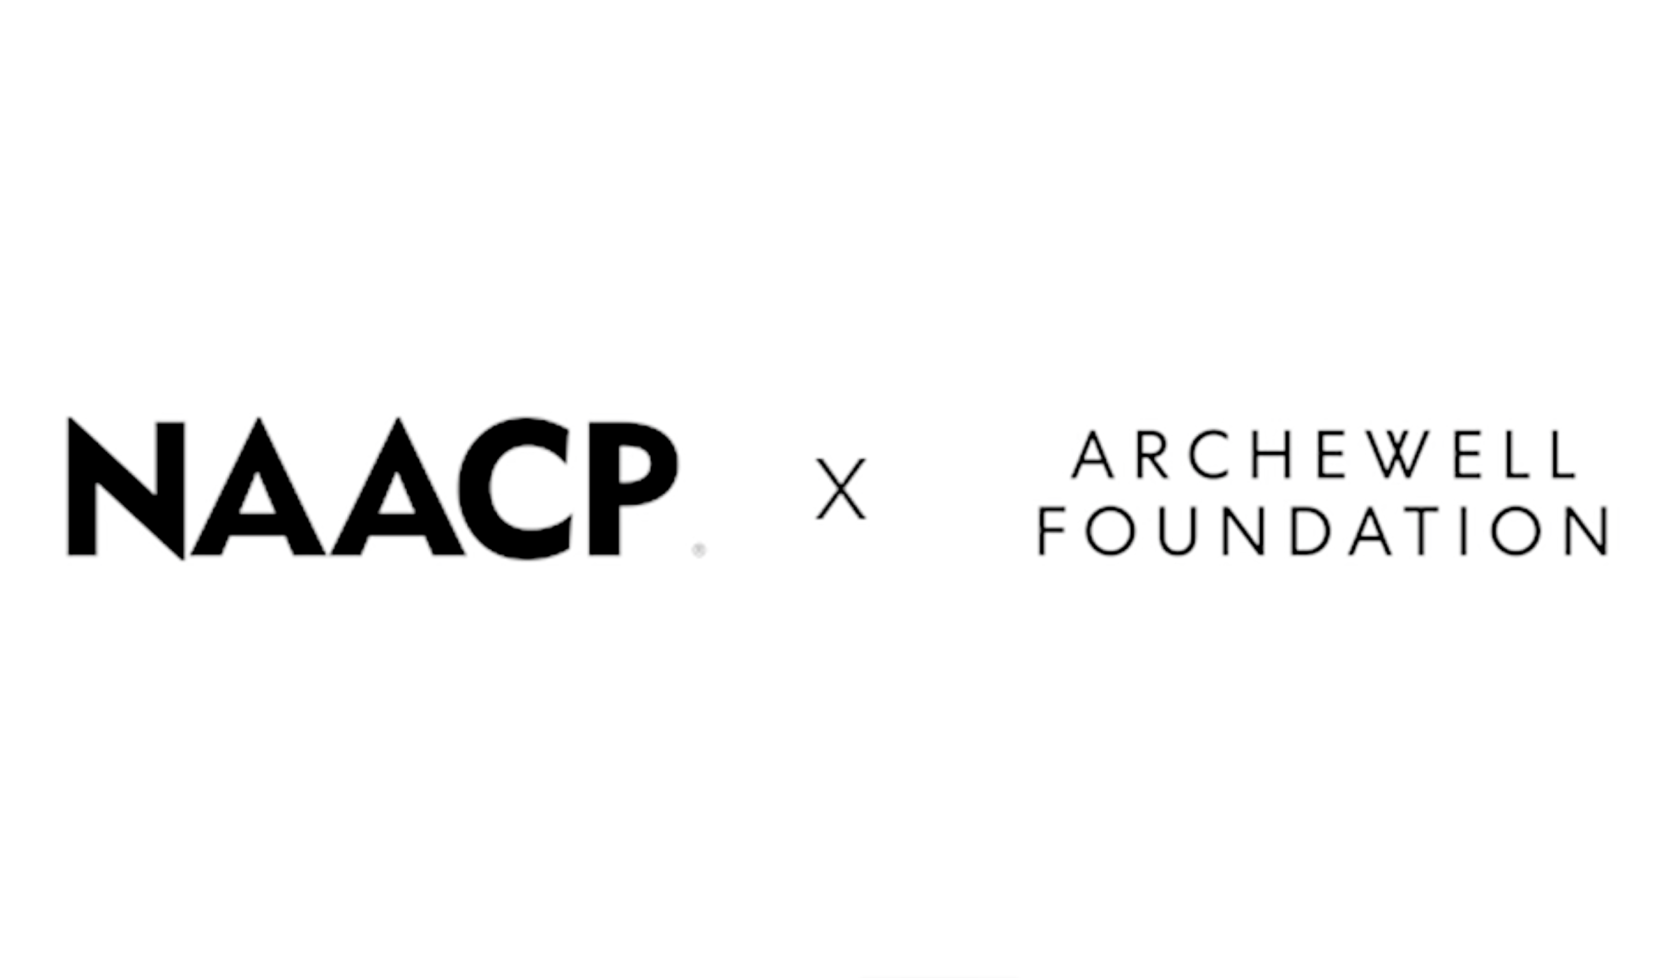 NAACP x Archewell Foundation